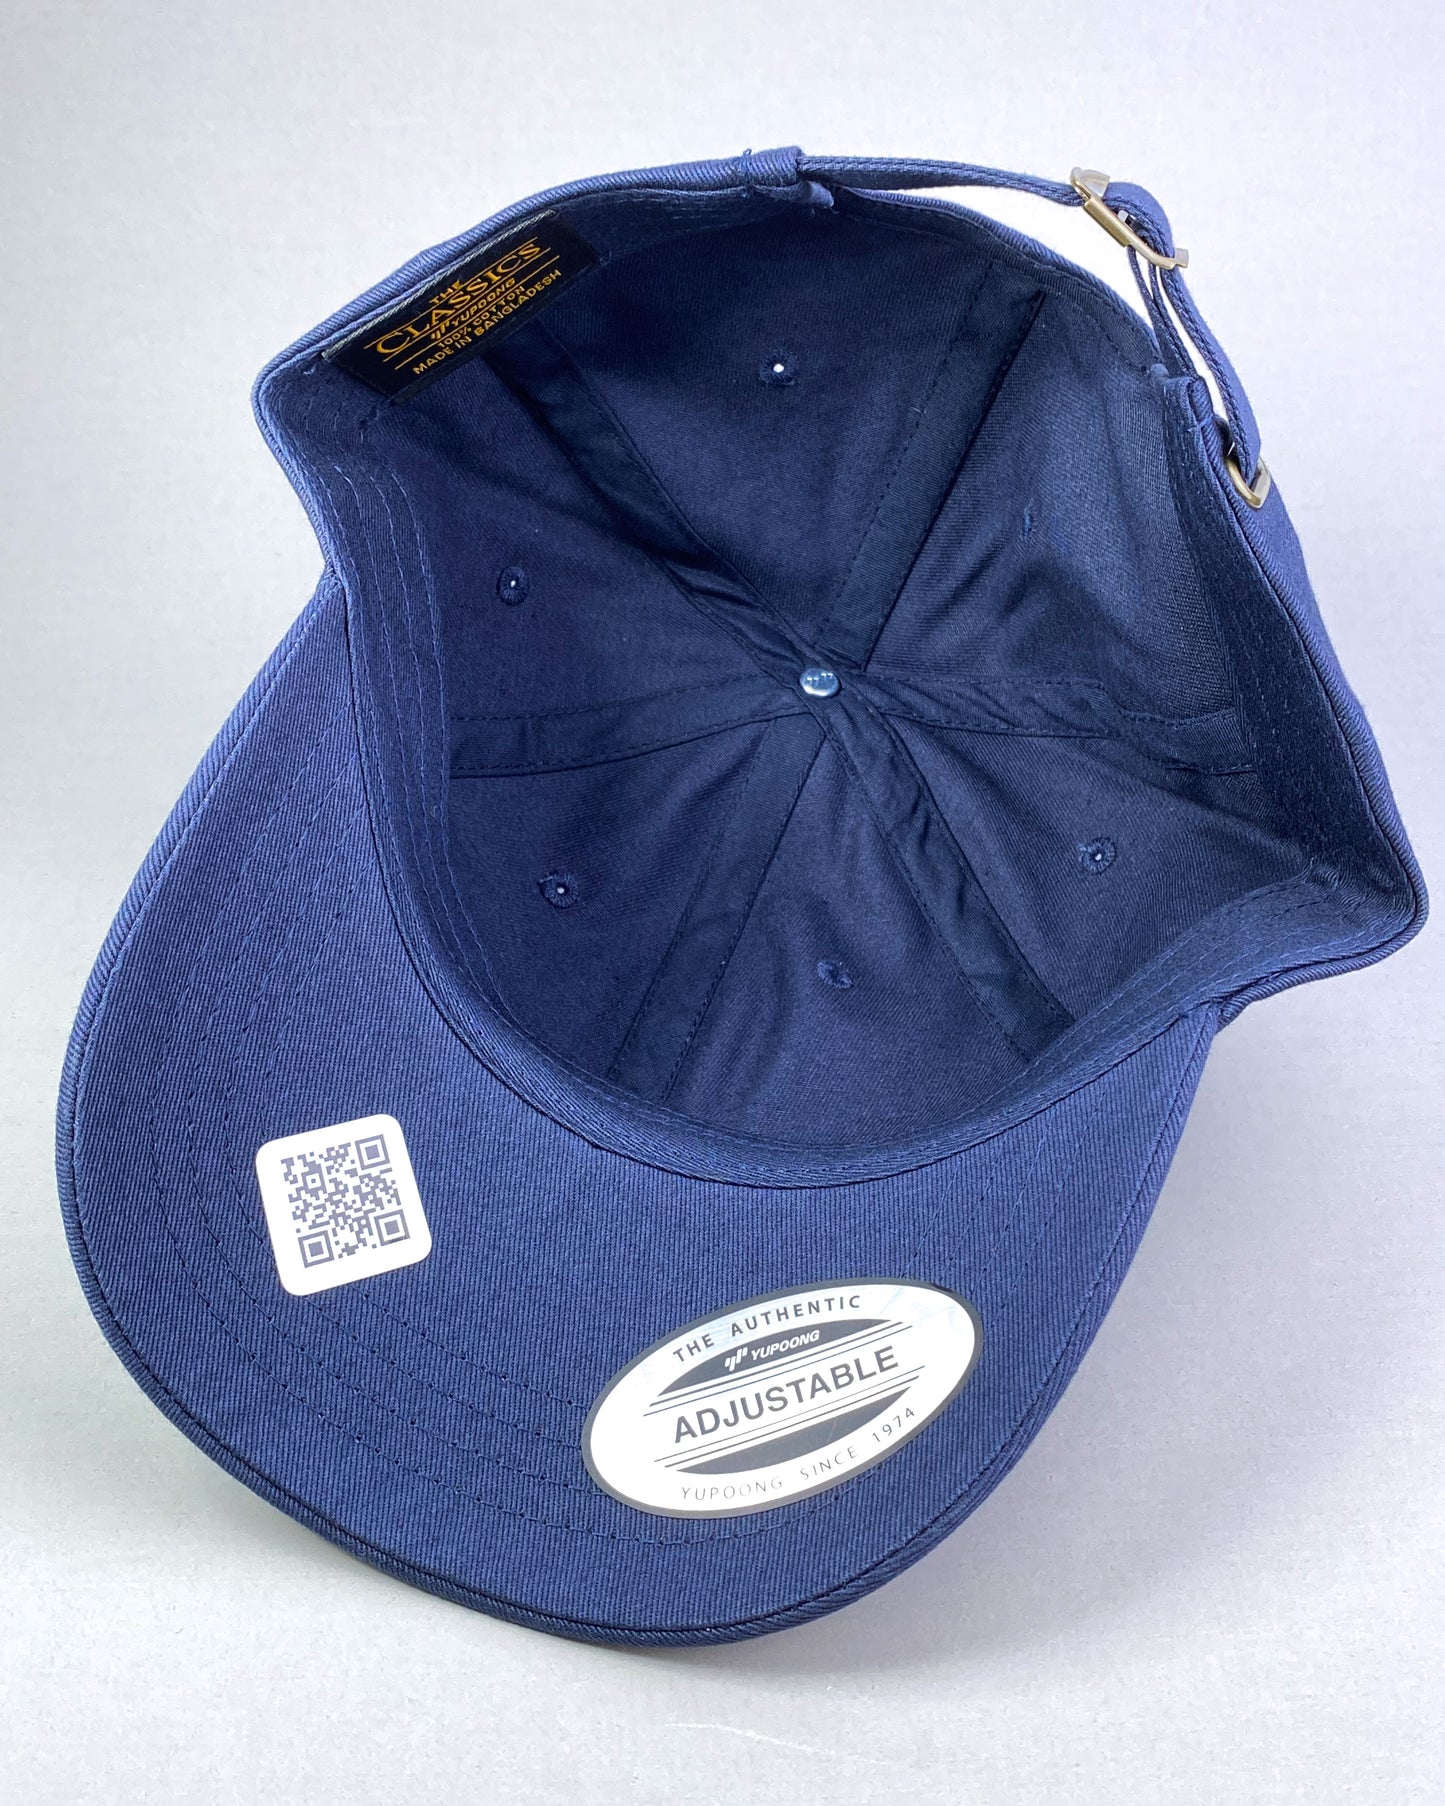 Bravo Premium hat in navy blue with sea turtle design leather patch